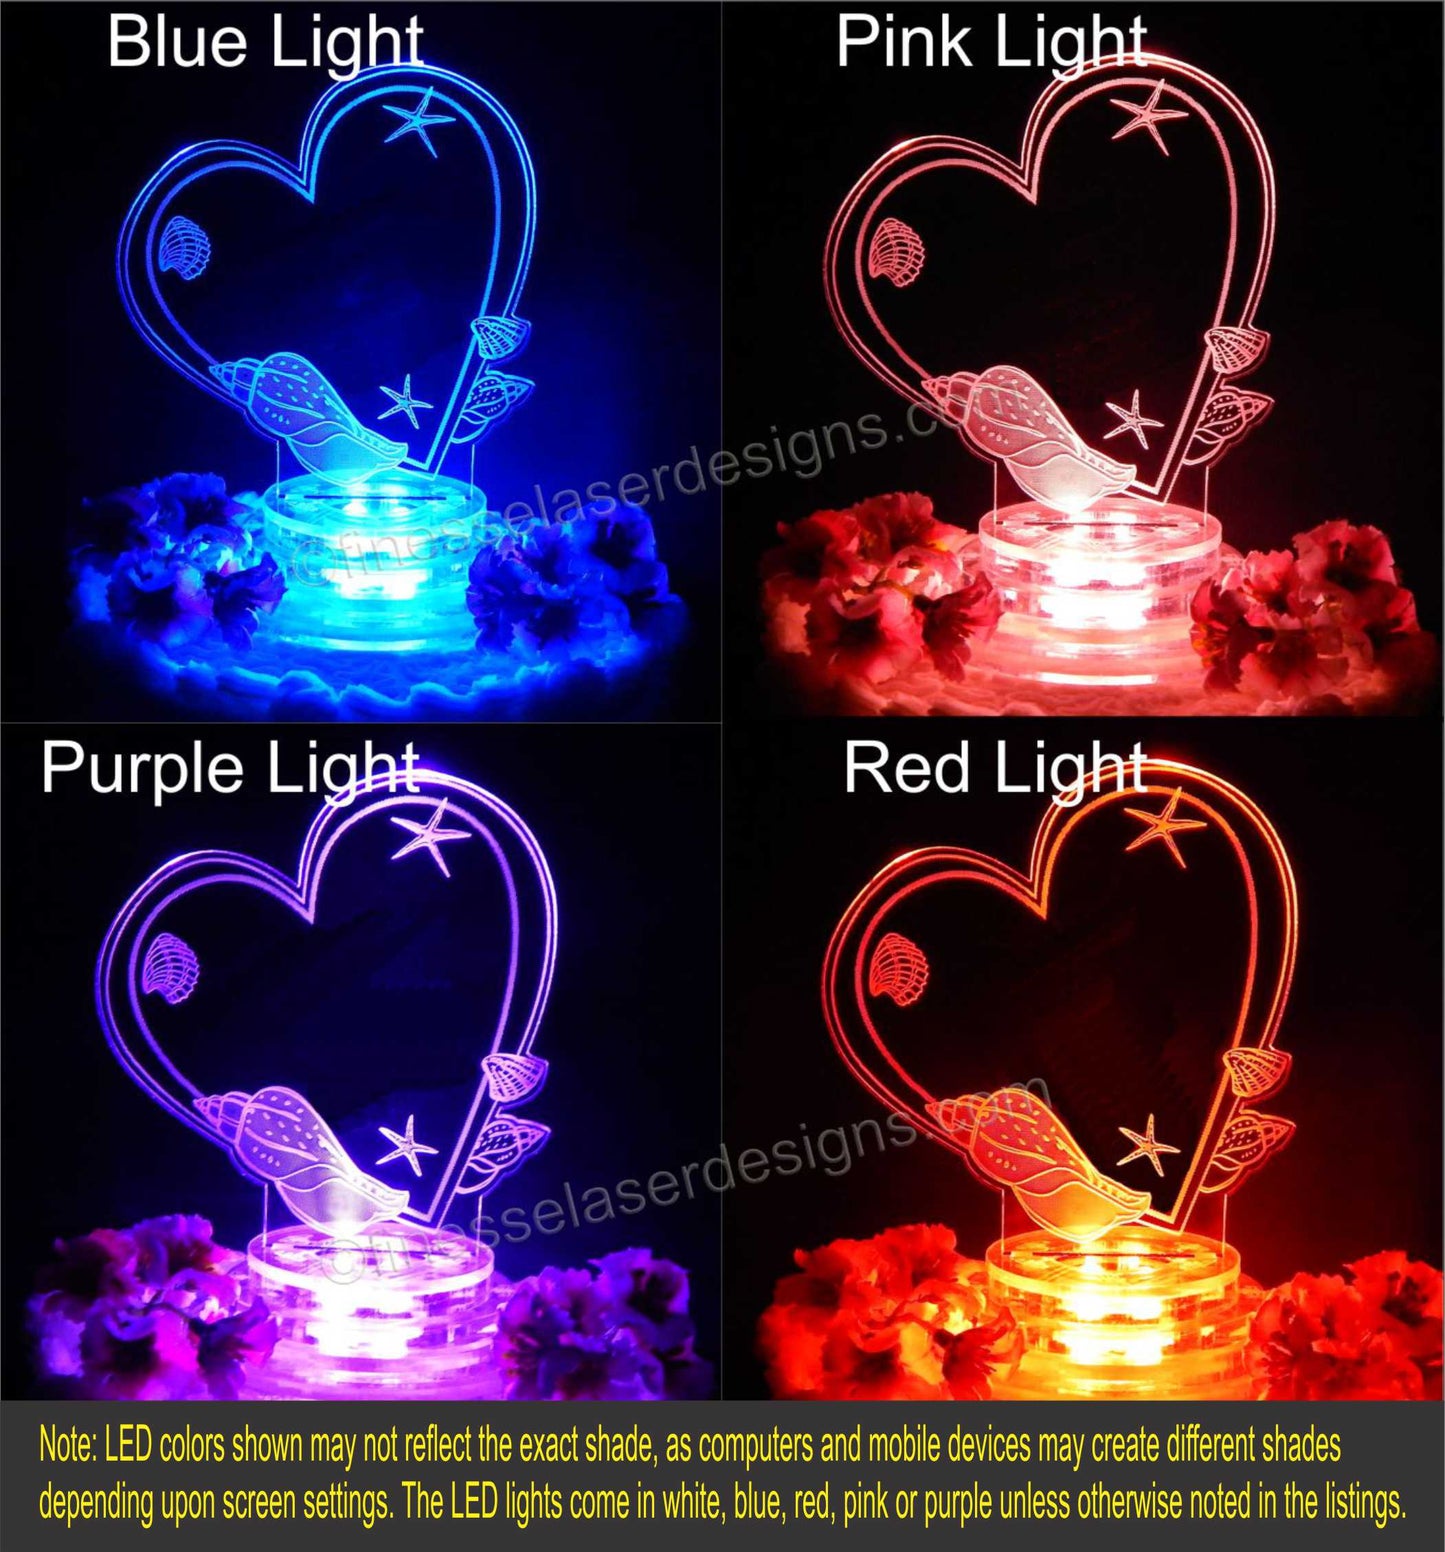 colored light views of a heart shaped cake topper decorated with seashells, showing blue, pink, purple and red lighted views